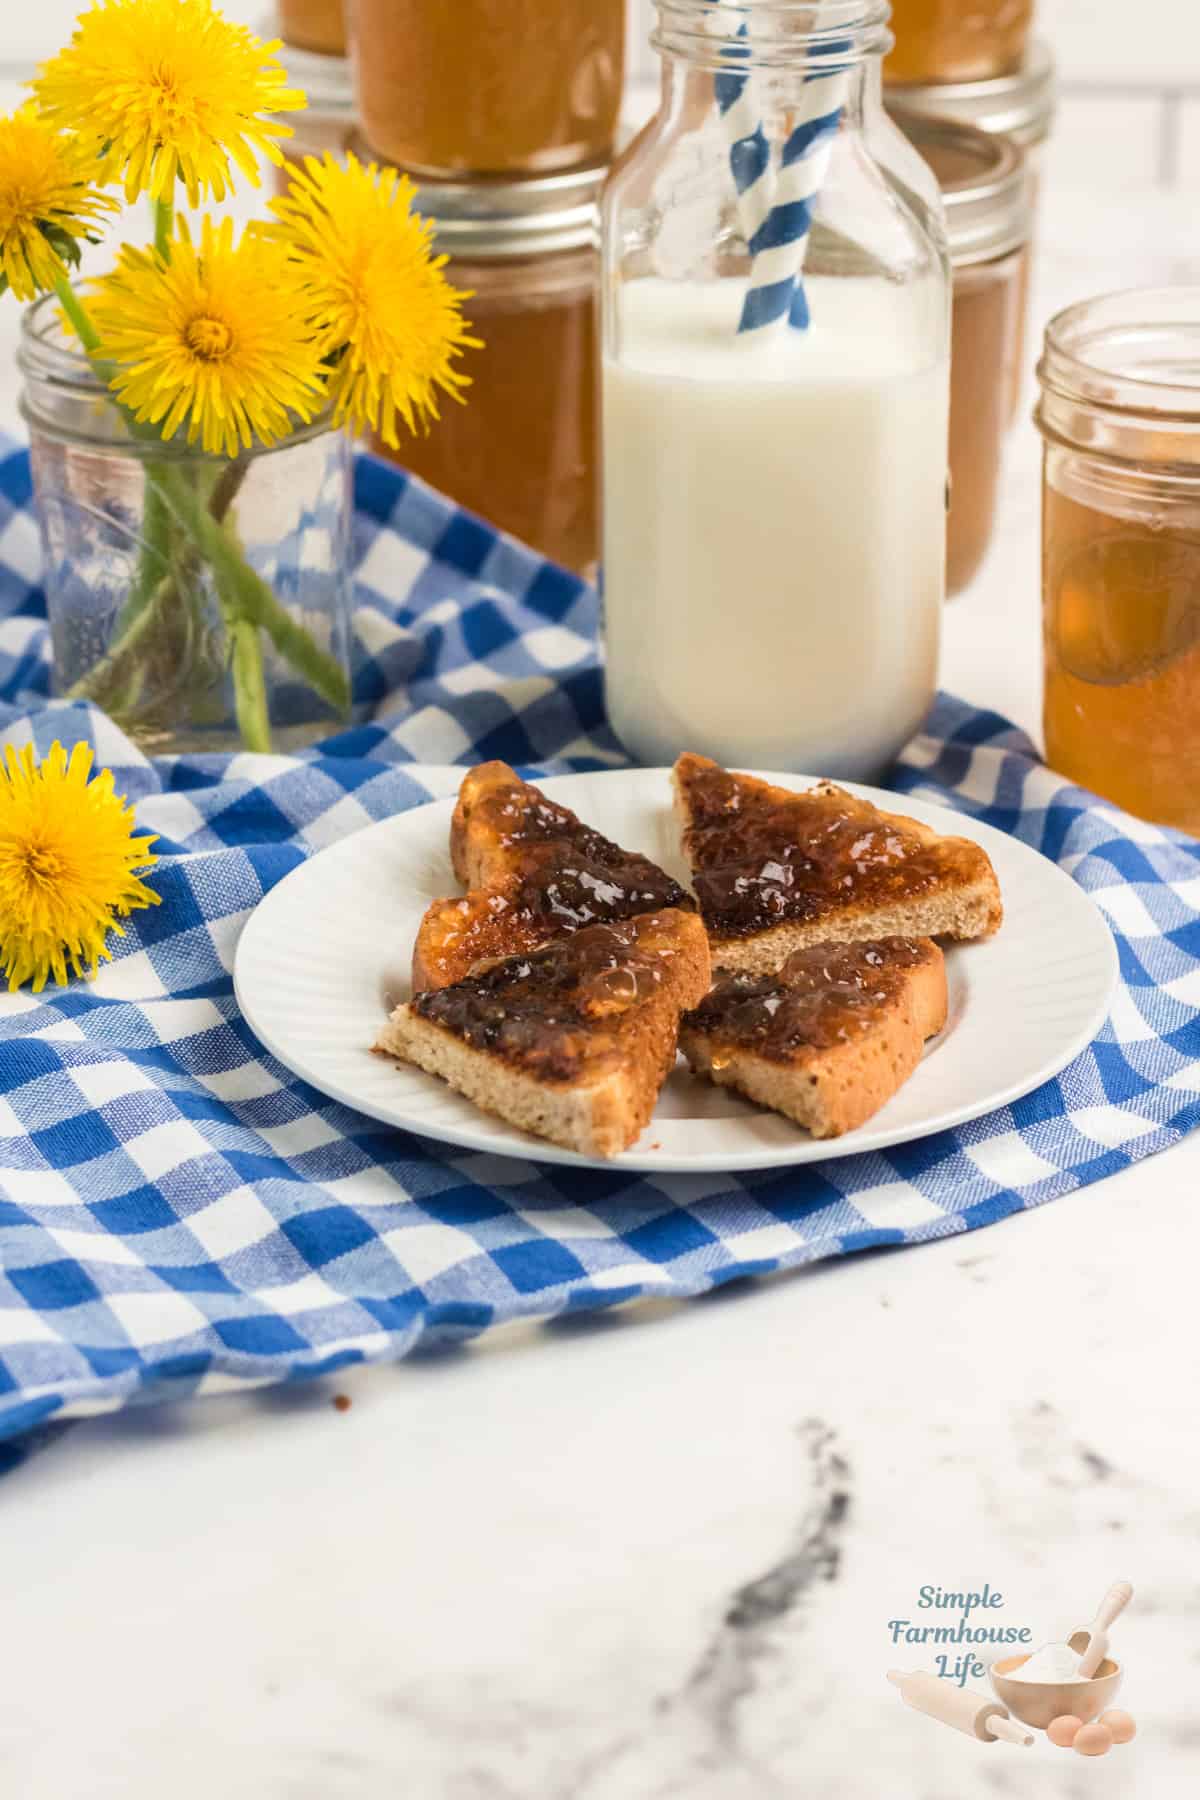 dandelion jelly on toast with milk and in jars